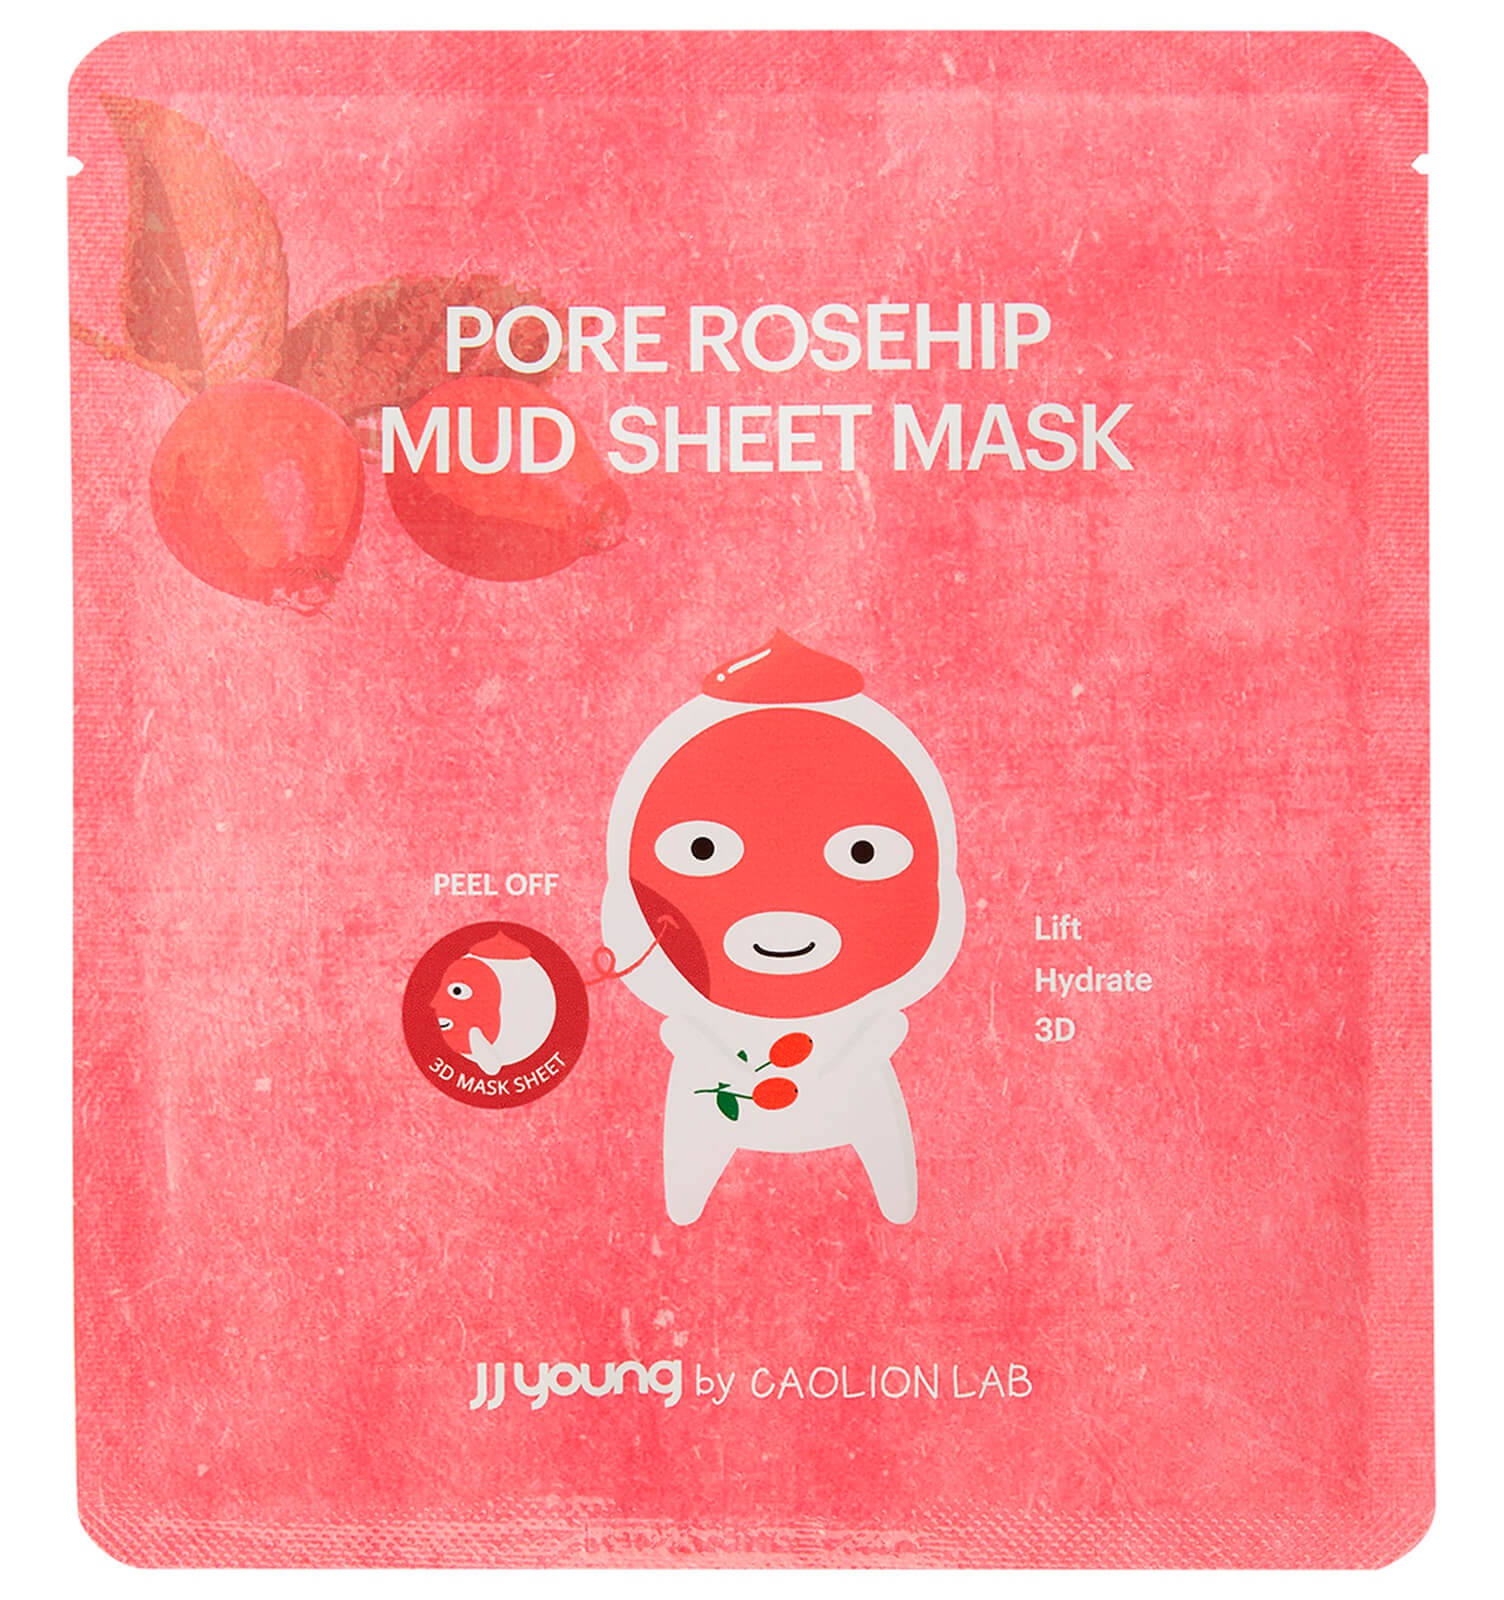 JJ young by CAOLION LAB Pore Rosehip Mud Sheet Mask